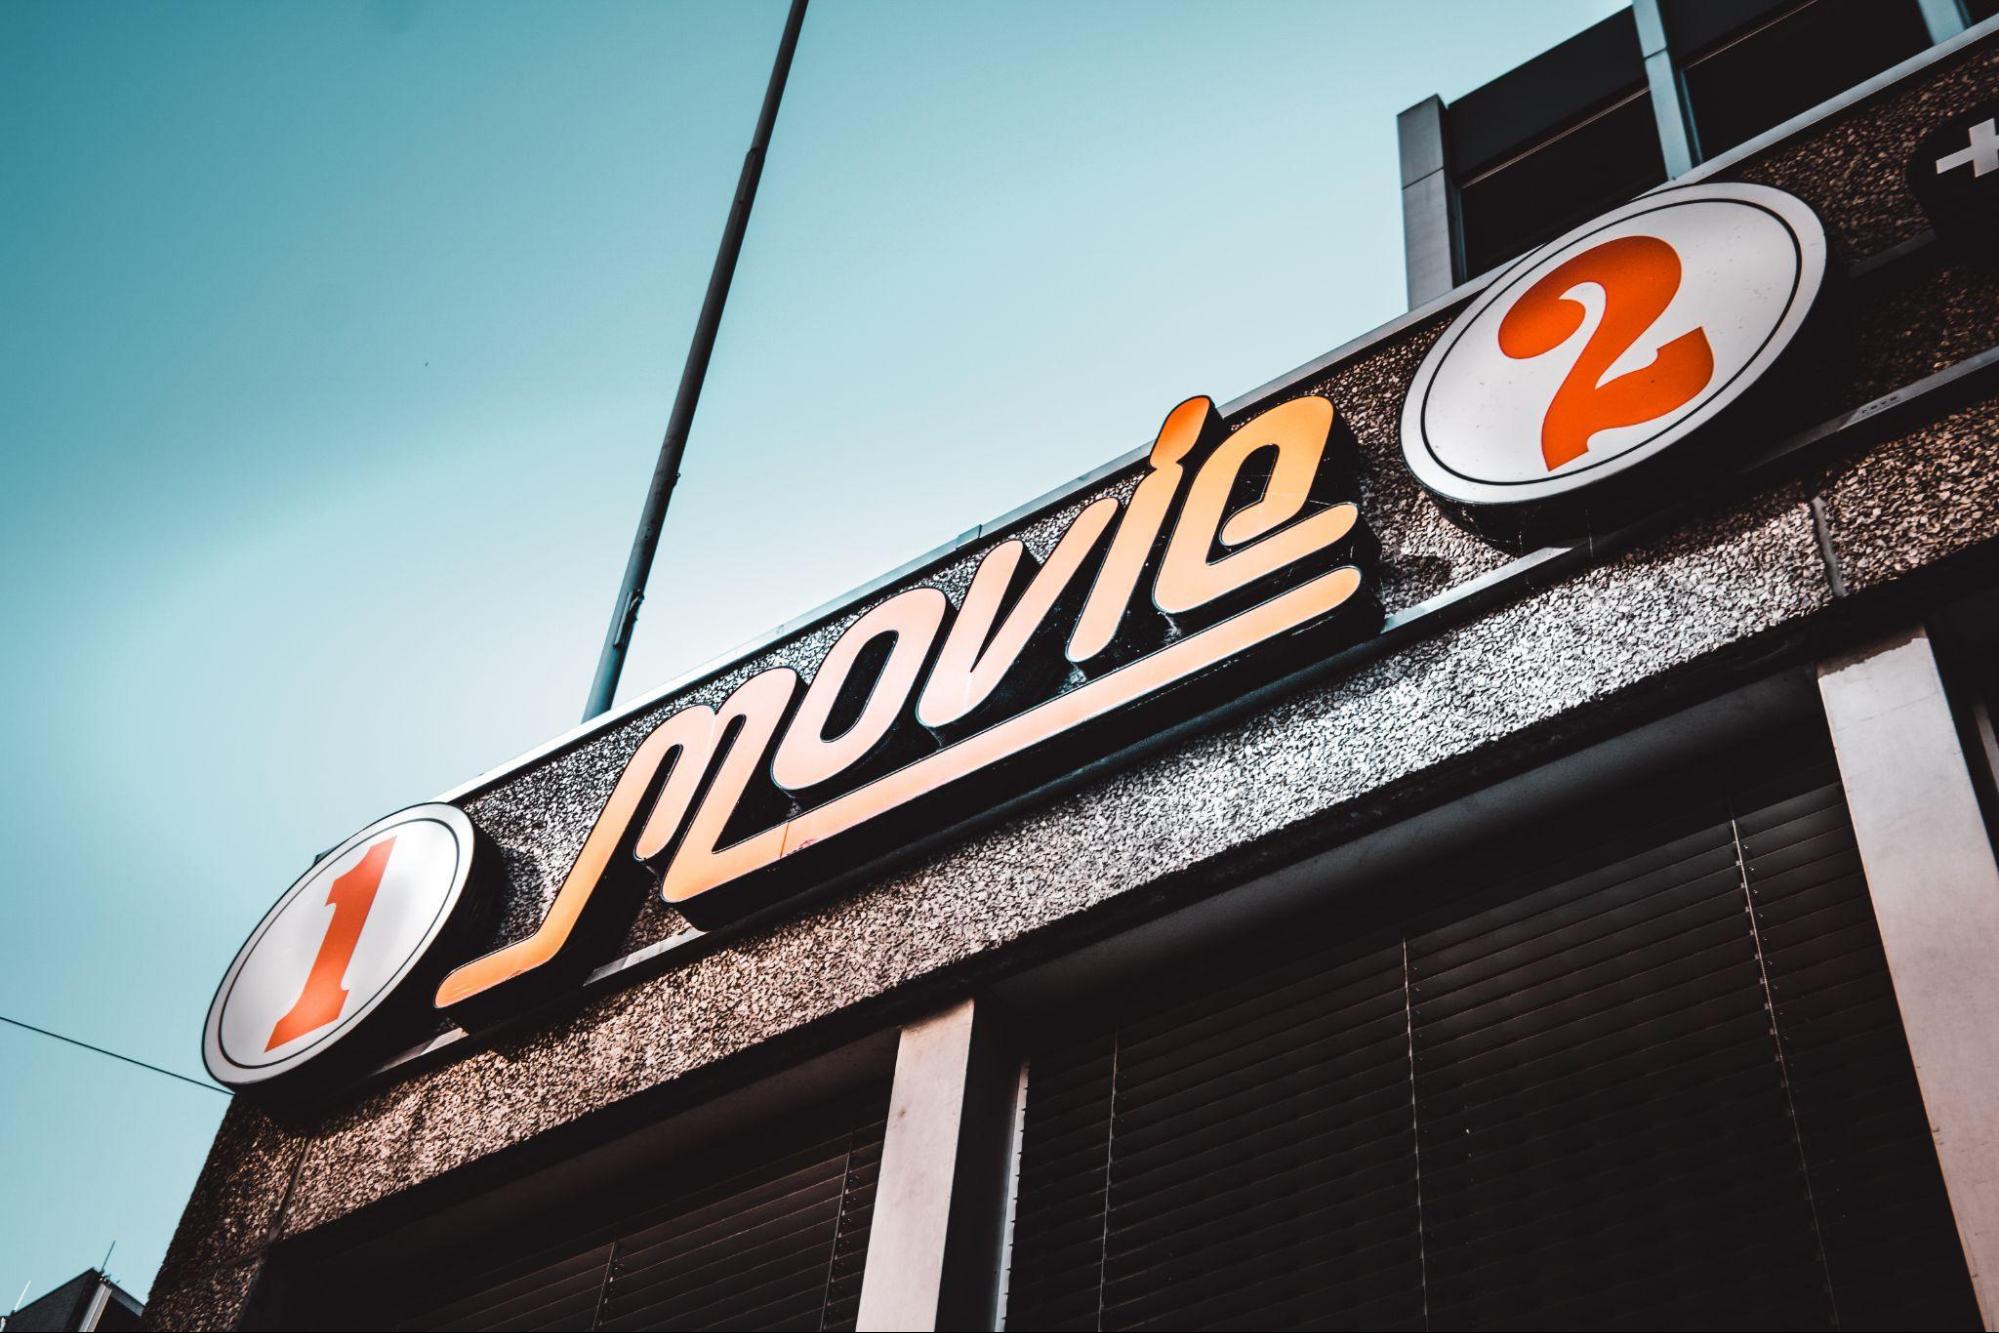 A movie 2 sign on the side of a building for your office.